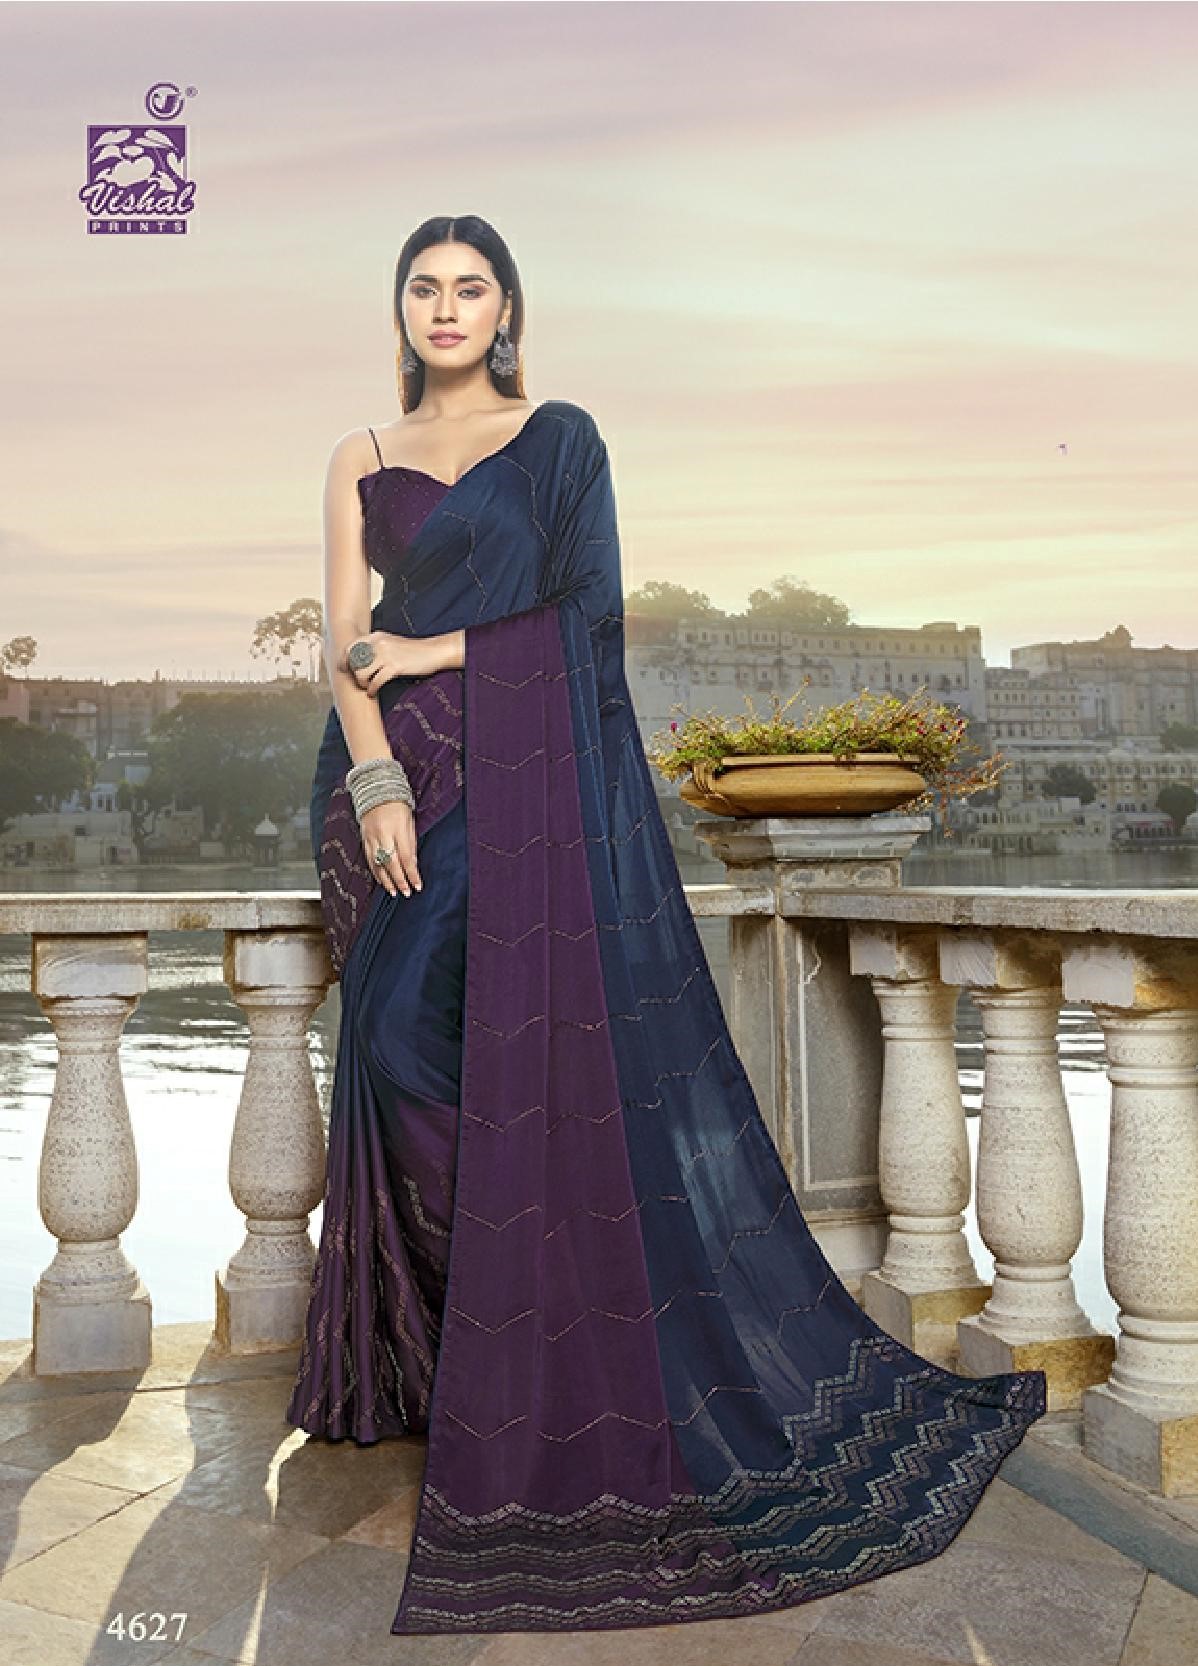 Vishal Presents Damore V-22 4626 - 4637 Series Beautiful Attractive Designer And Fancy Work Party Wera Saree Collection